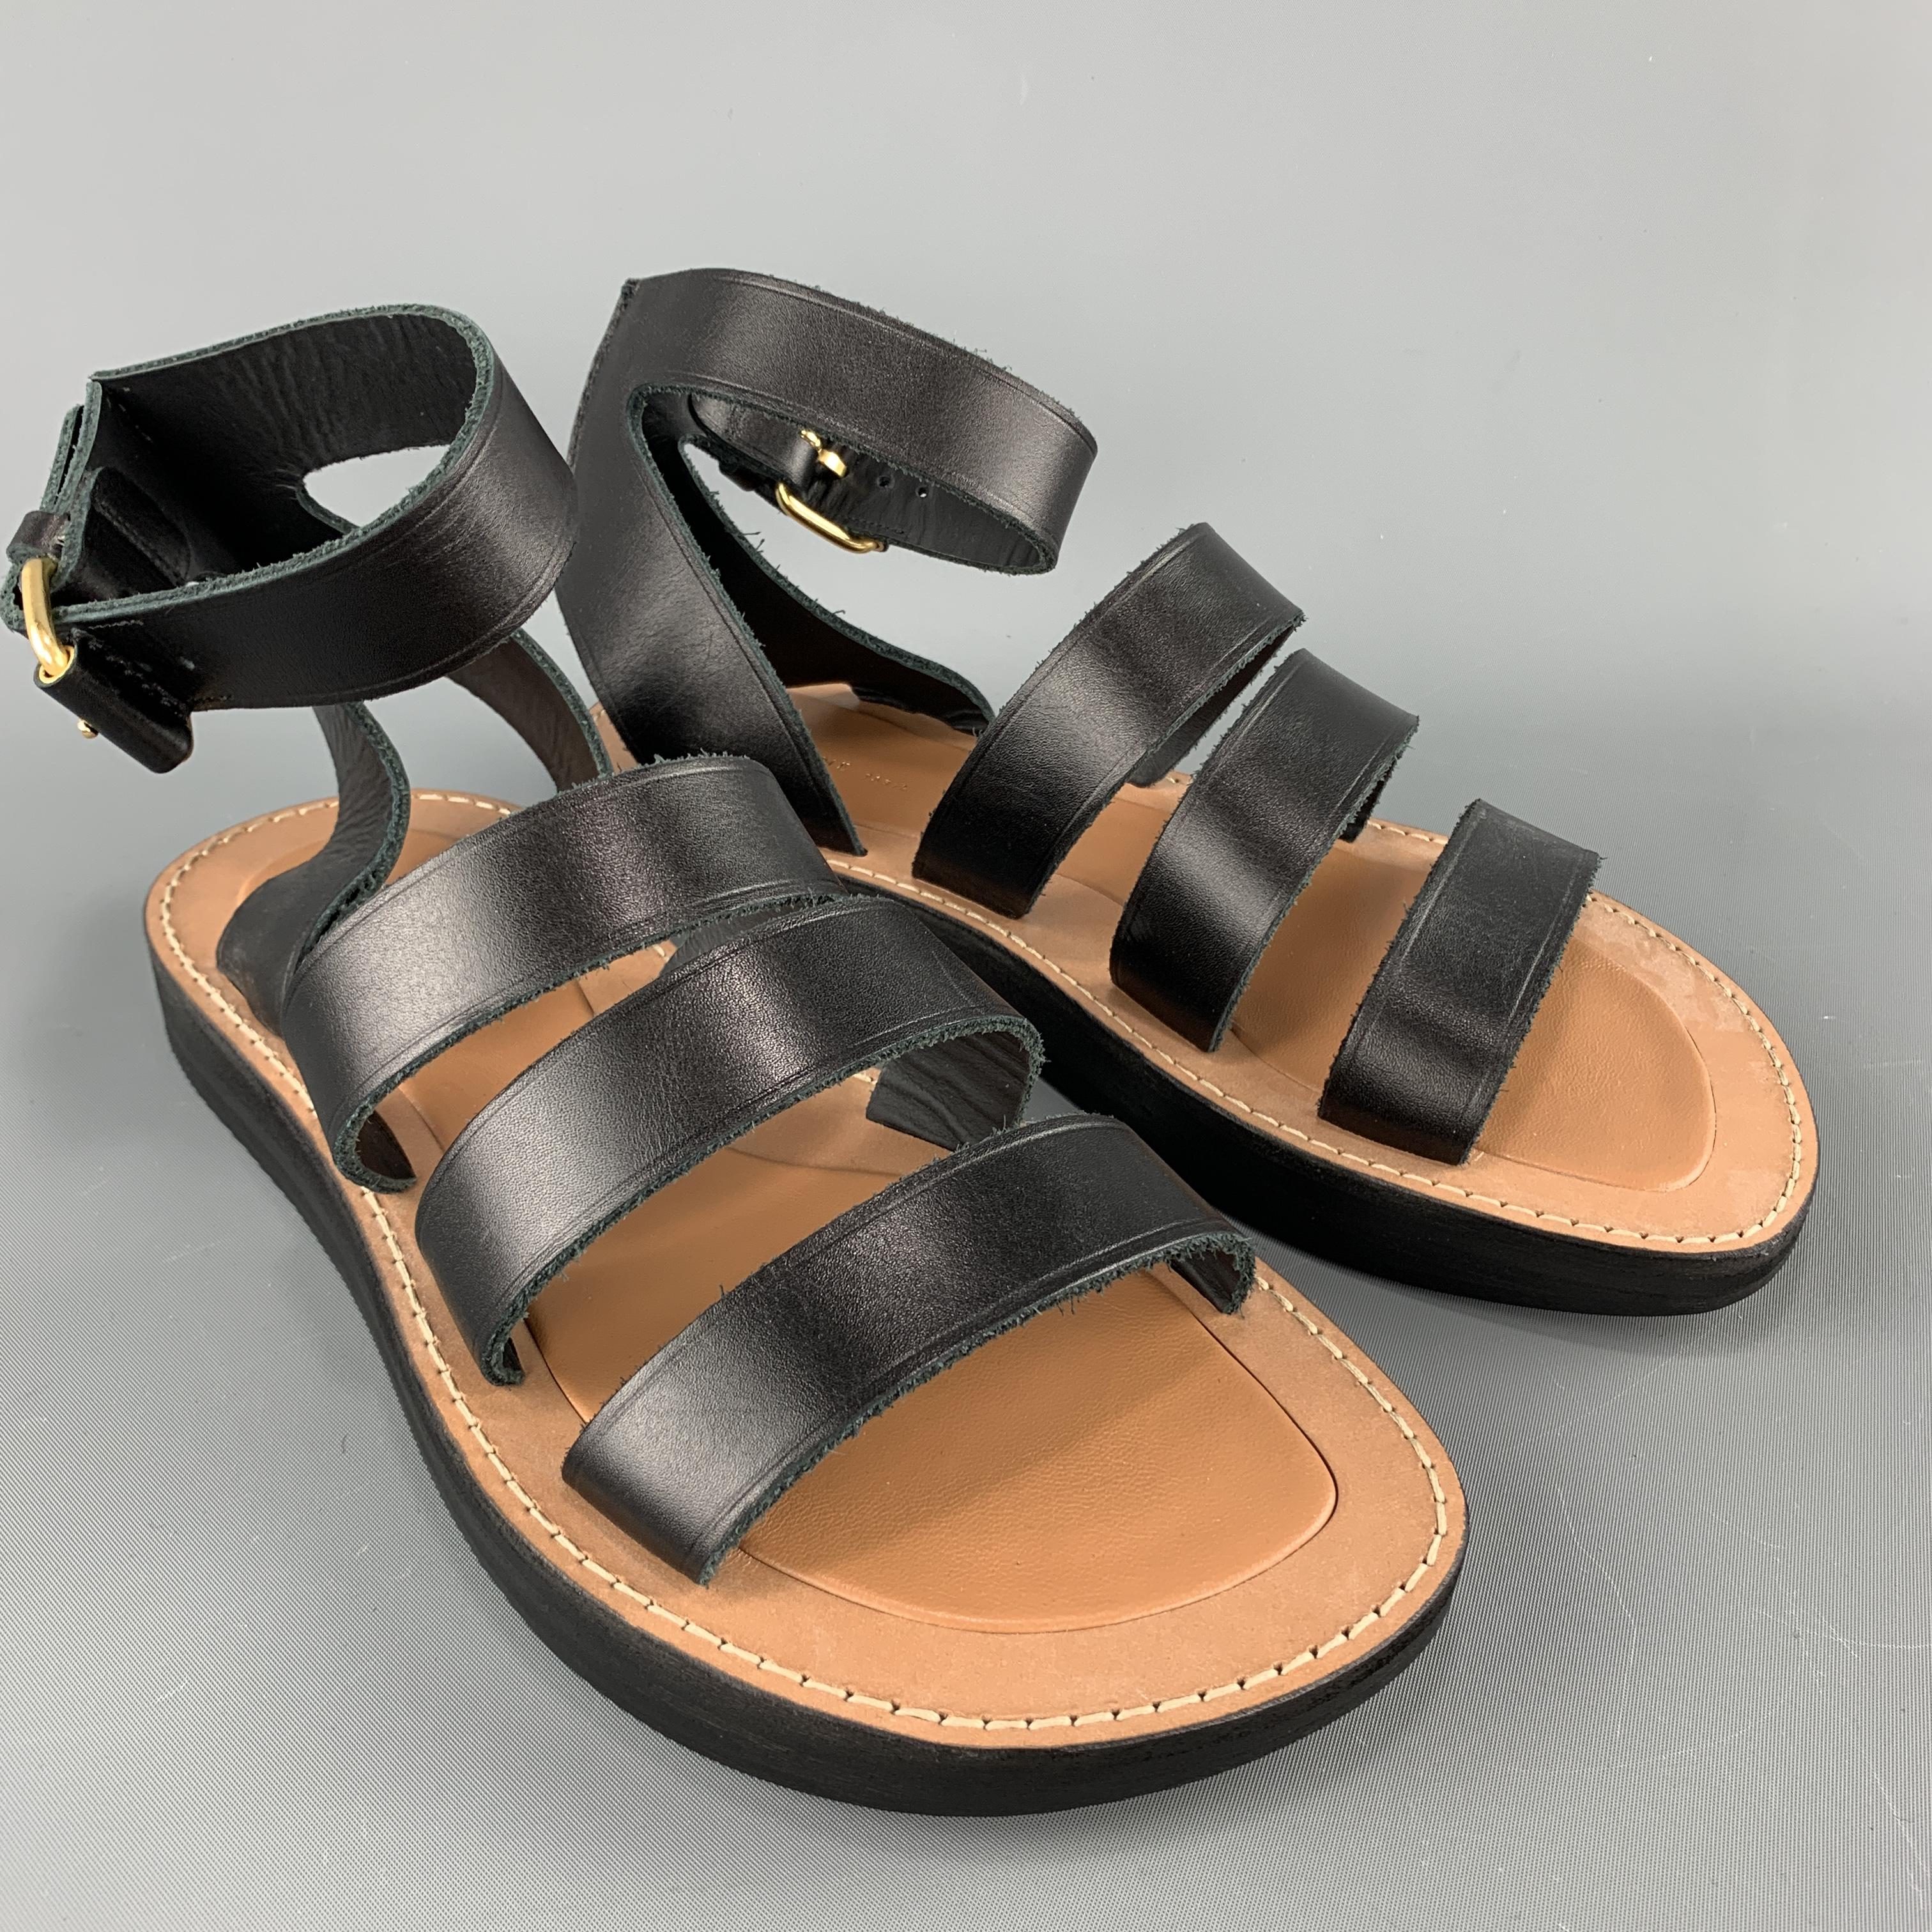 CELINE sandals featured three black toe straps, thick sole, and ankle harness with gold tone buckle. Made in Italy.

Excellent Pre-Owned Condition.
Marked: IT 40